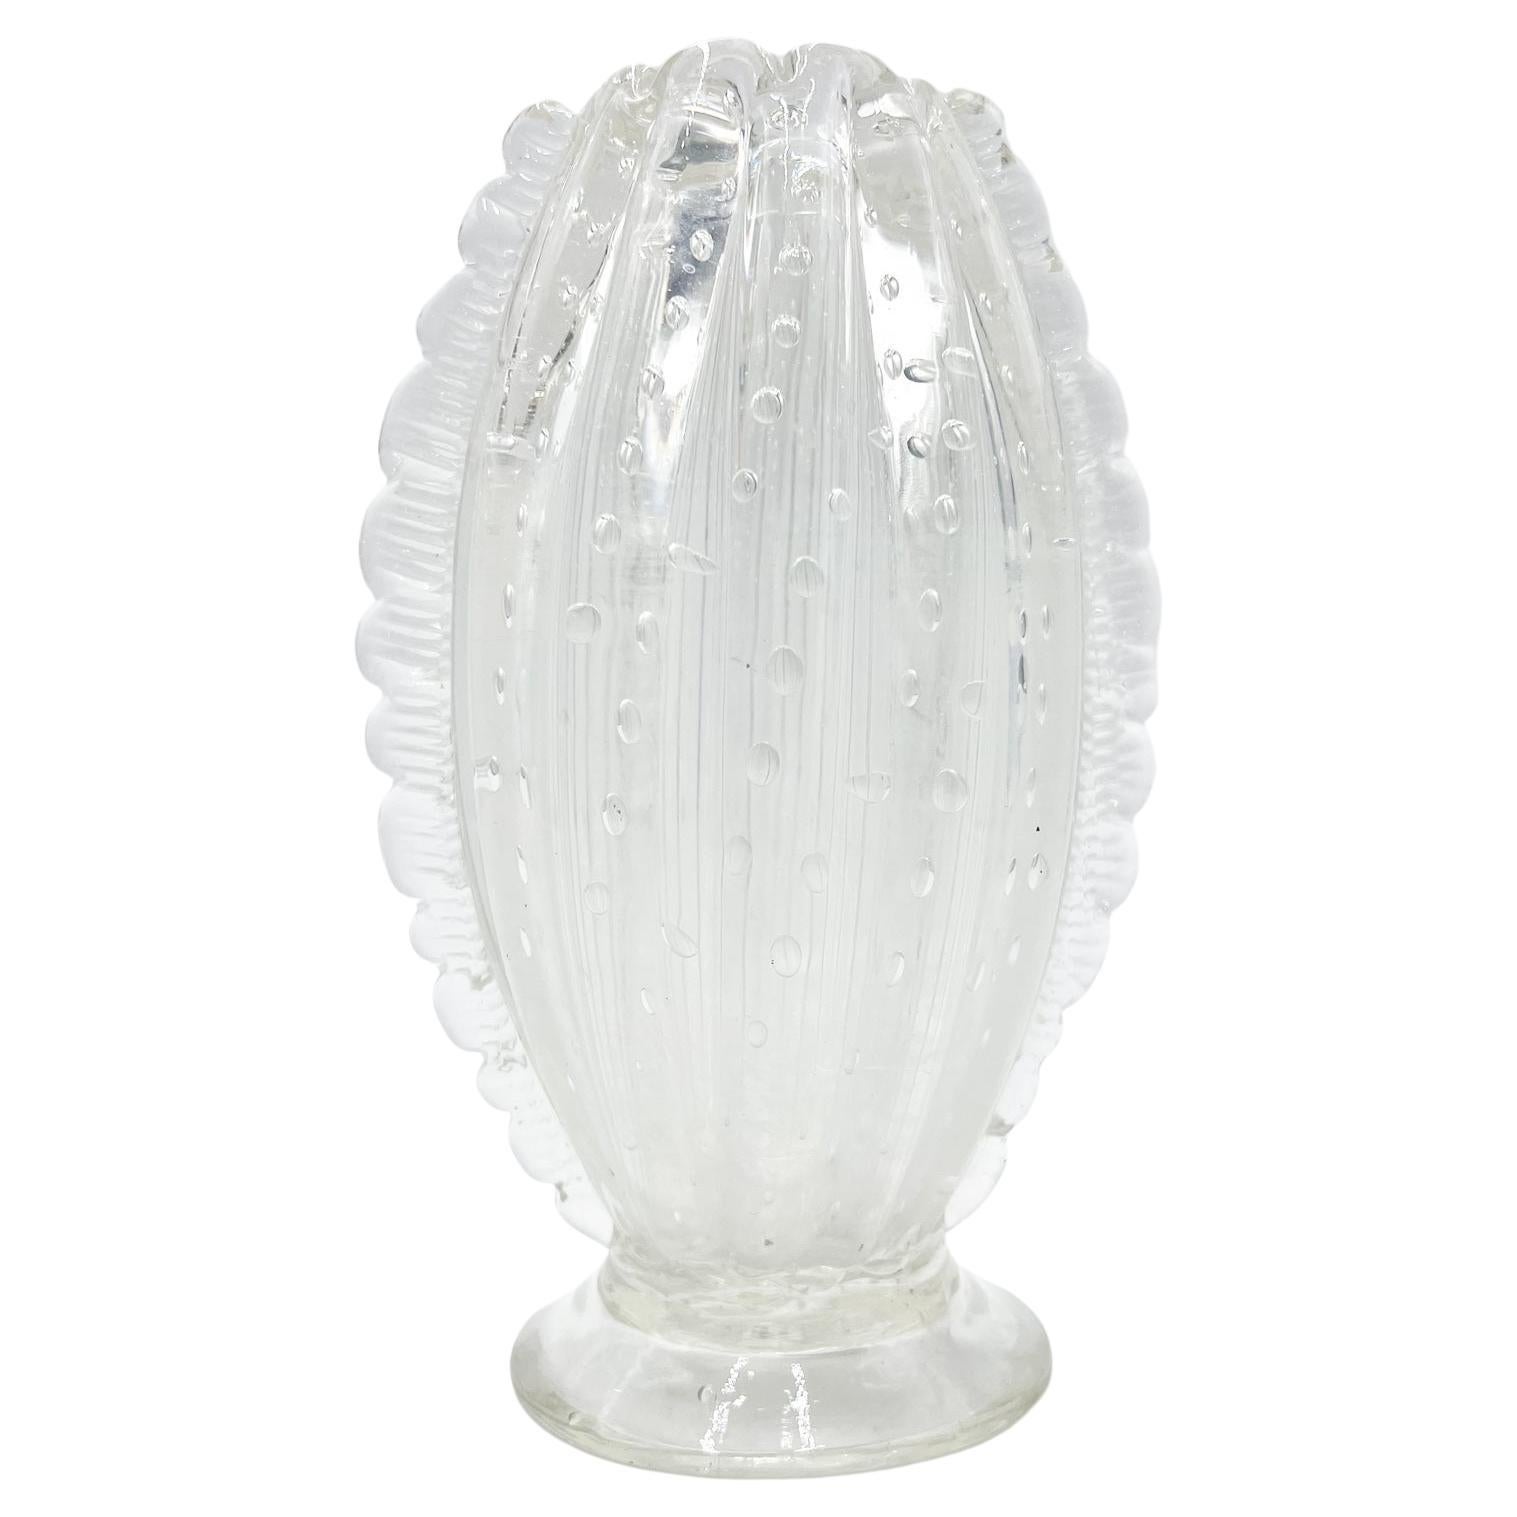 Murano Glass Vase by Barovier from the 1960s